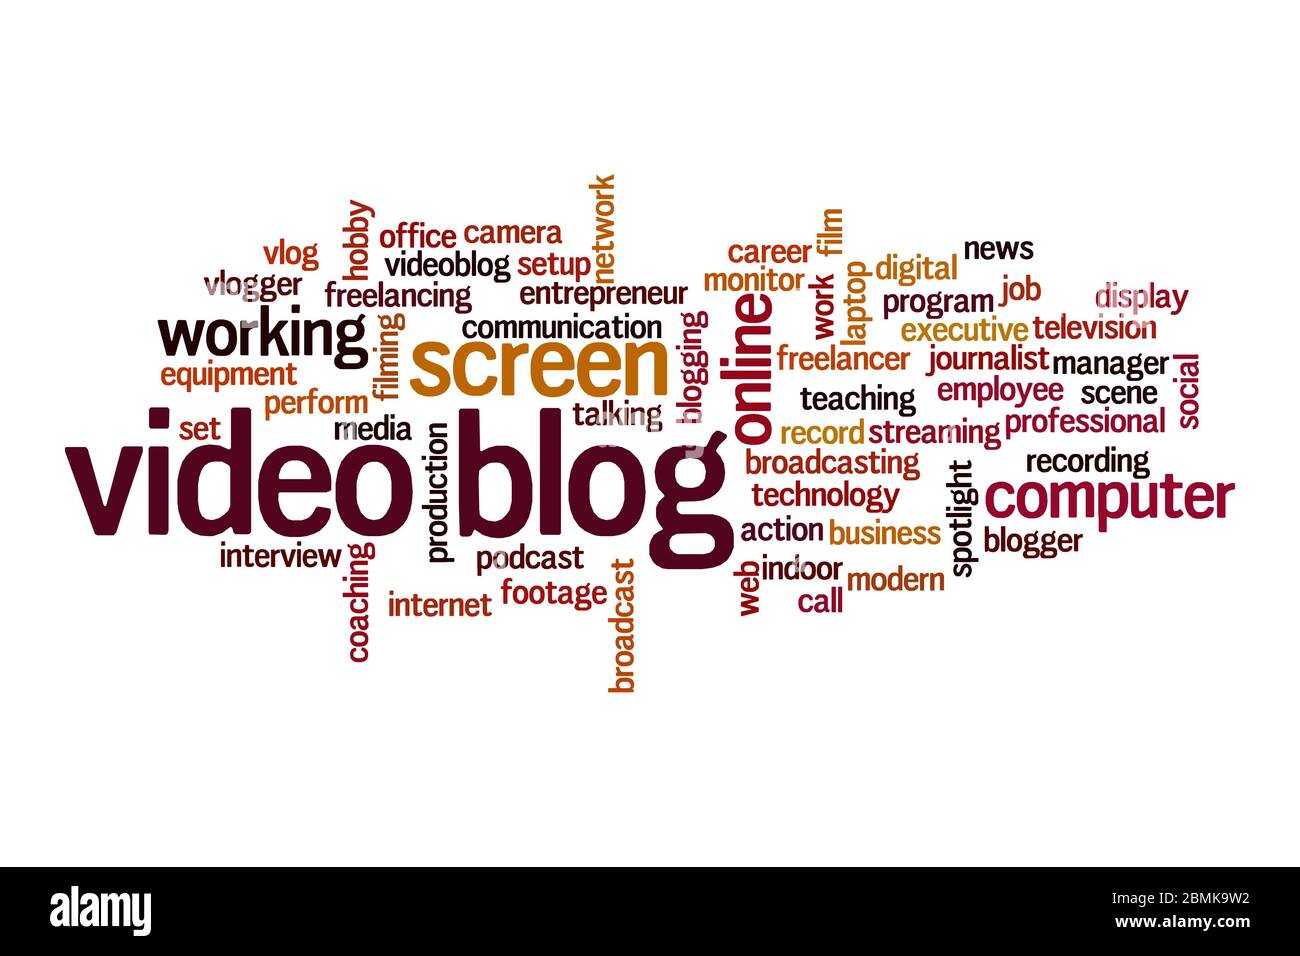 Video blog word cloud concept on white background Stock Photo